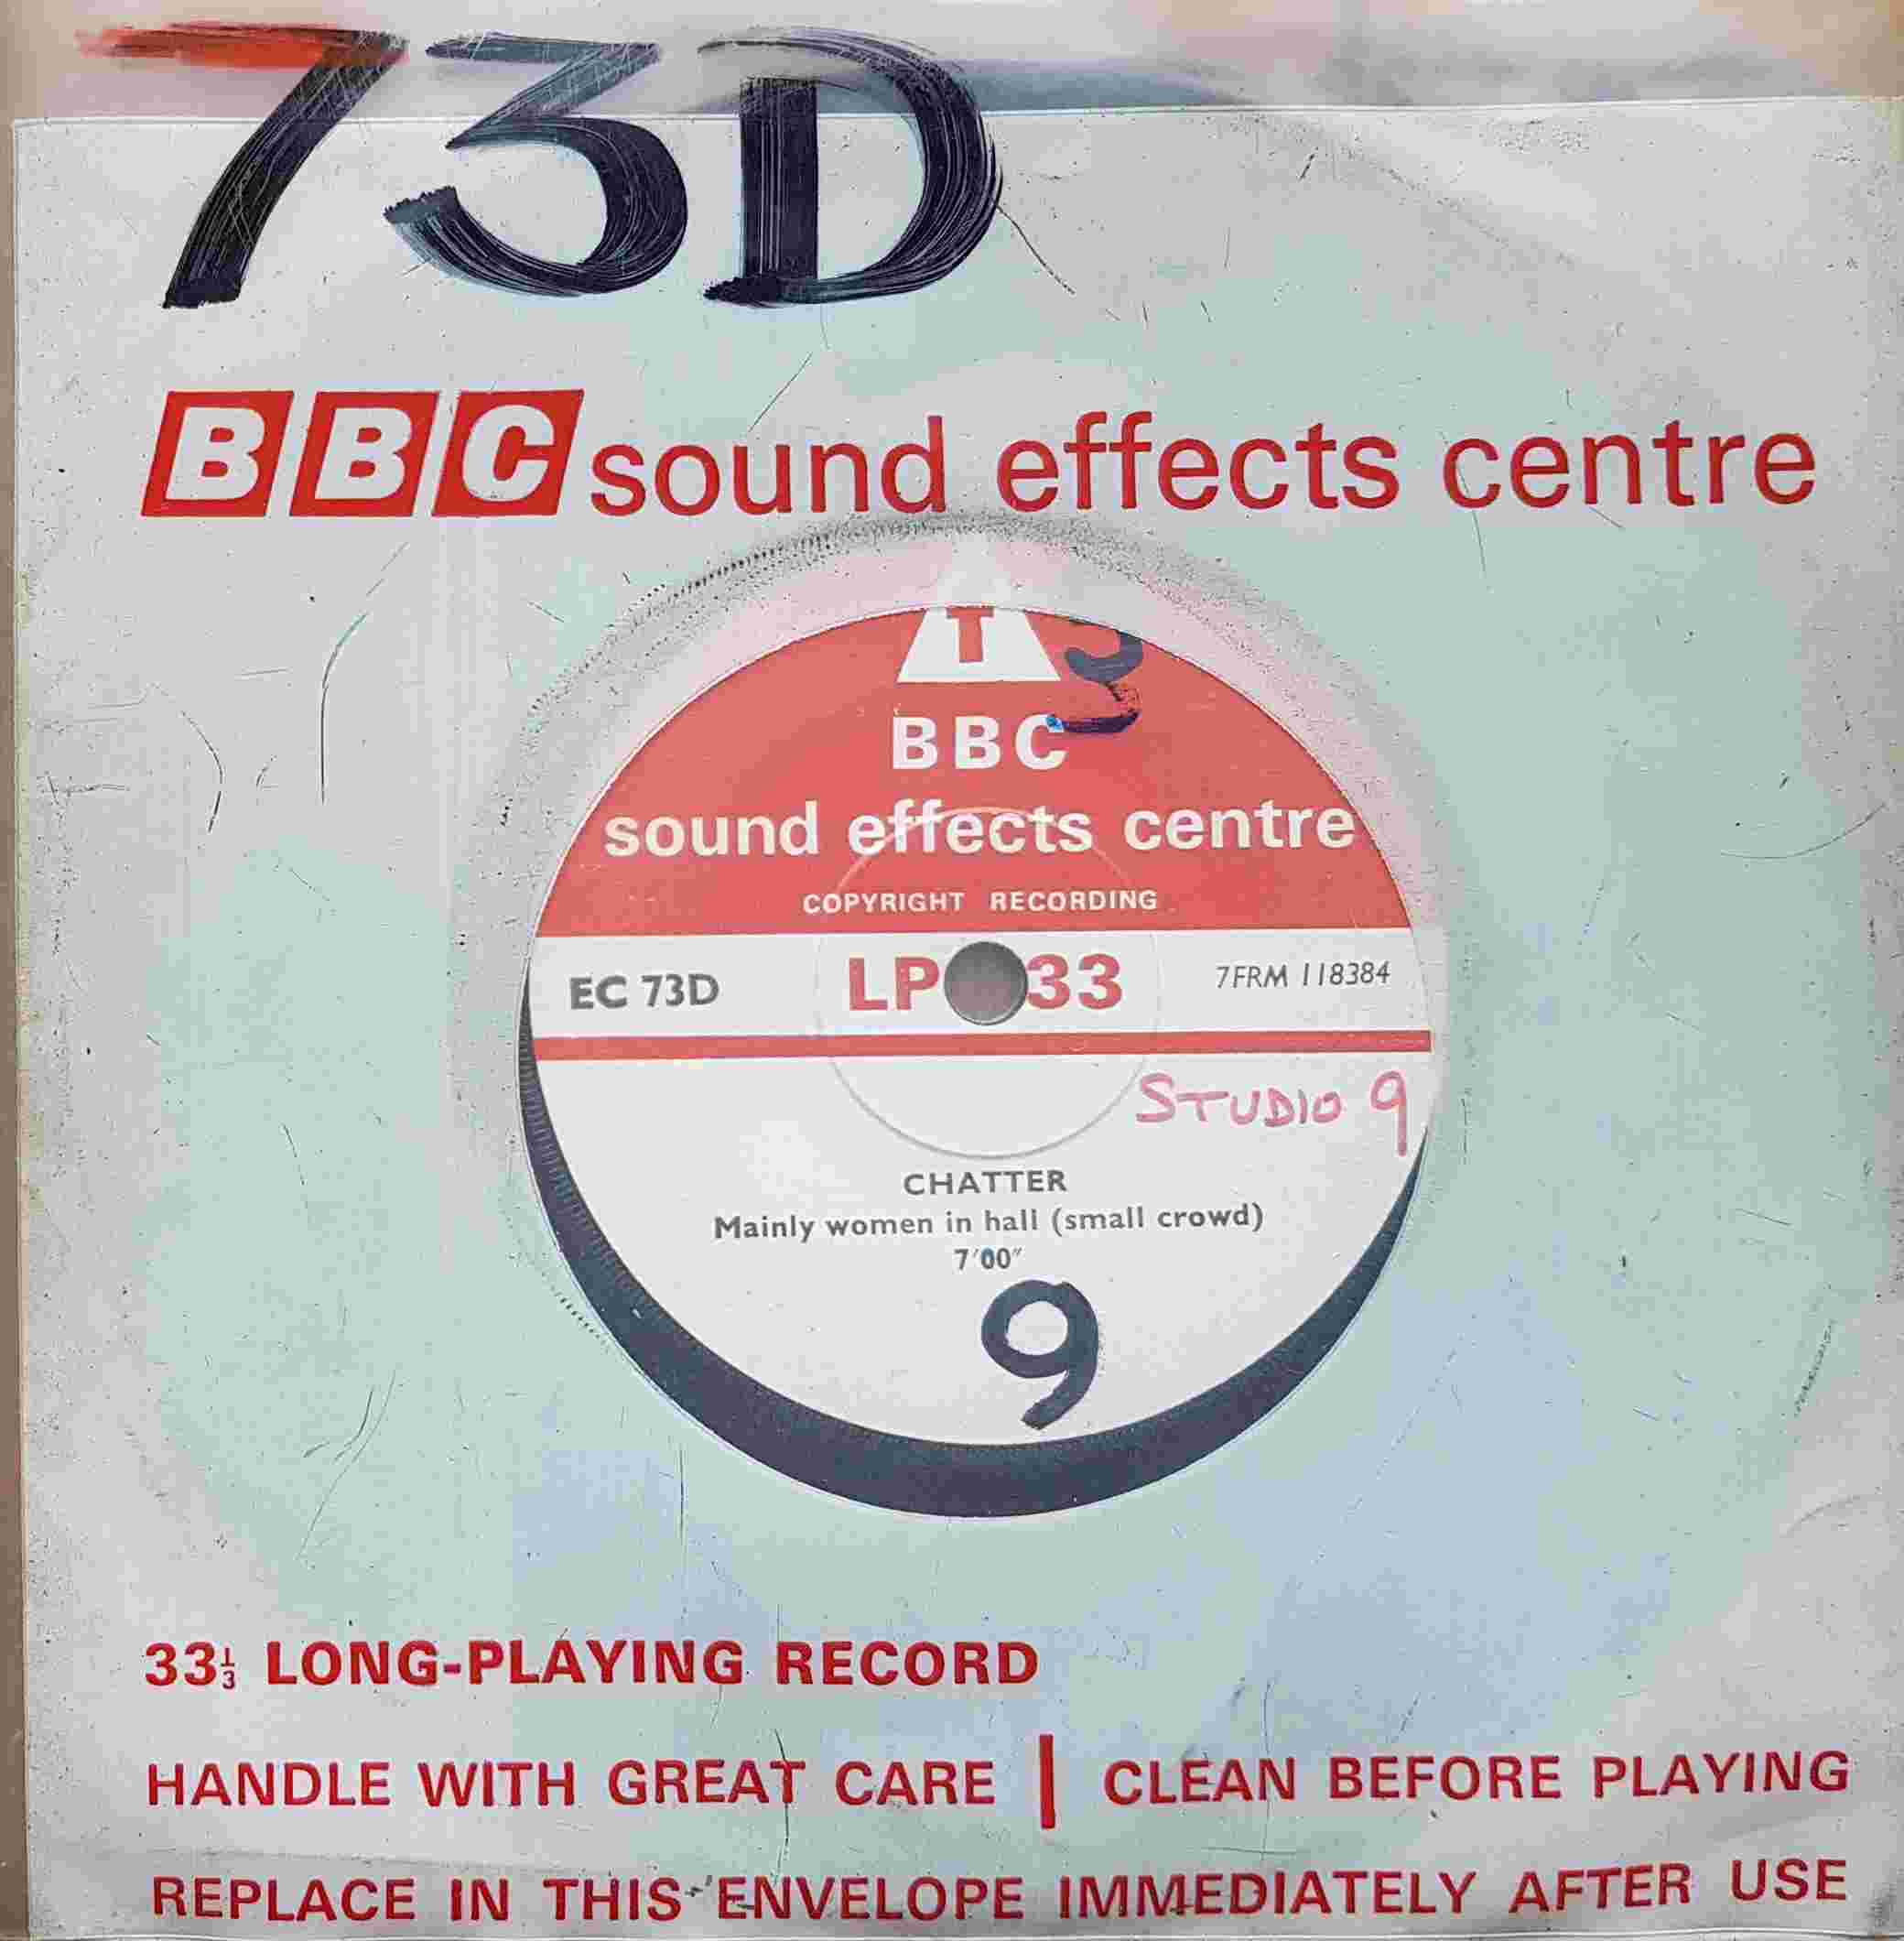 Picture of EC 73D Chatter by artist Not registered from the BBC records and Tapes library